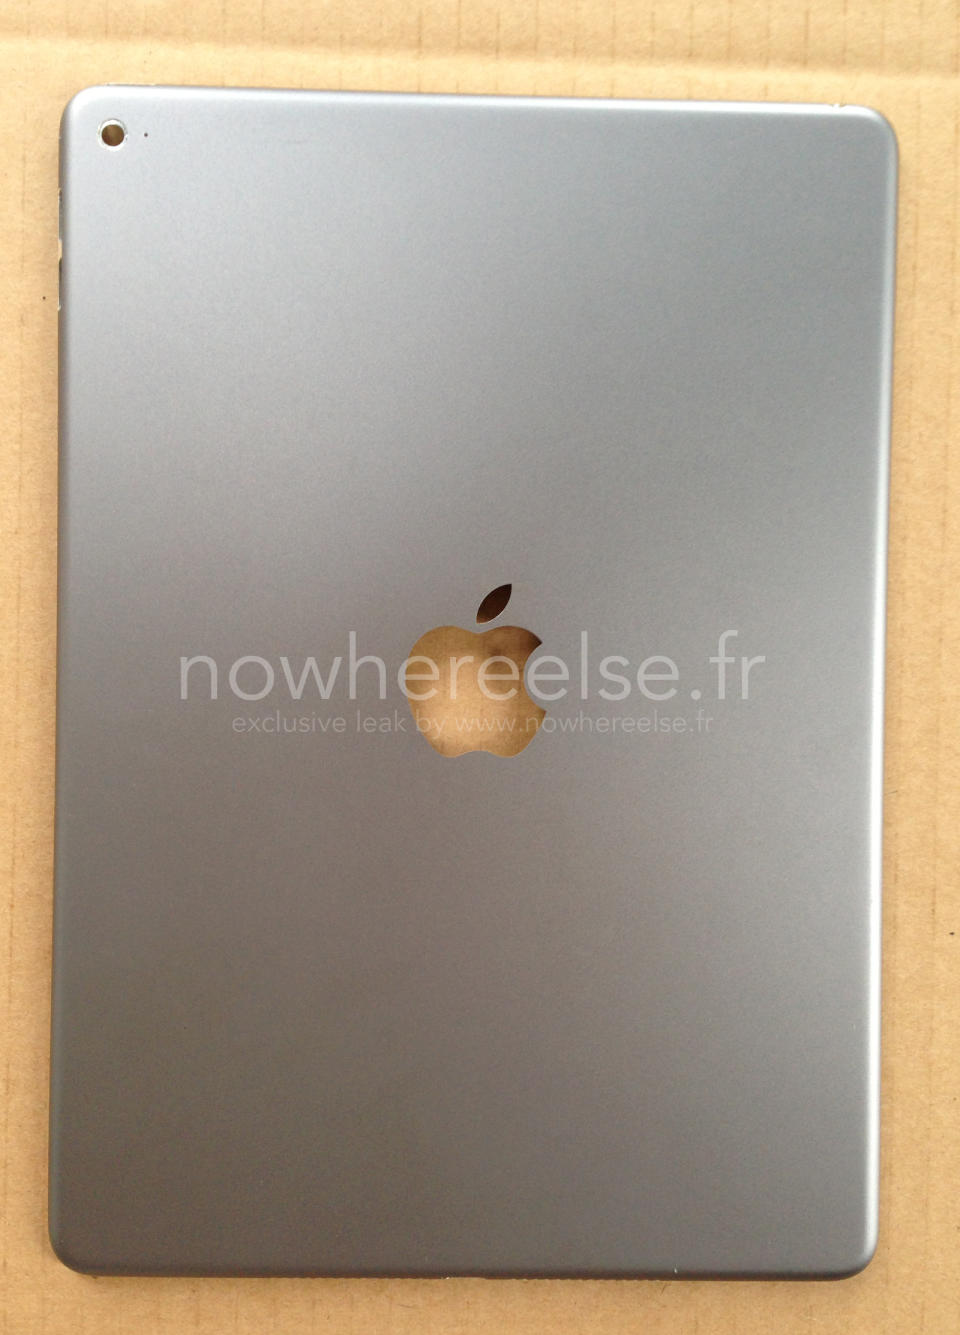 Next-gen iPad Air rear shell shown up close in major new leak